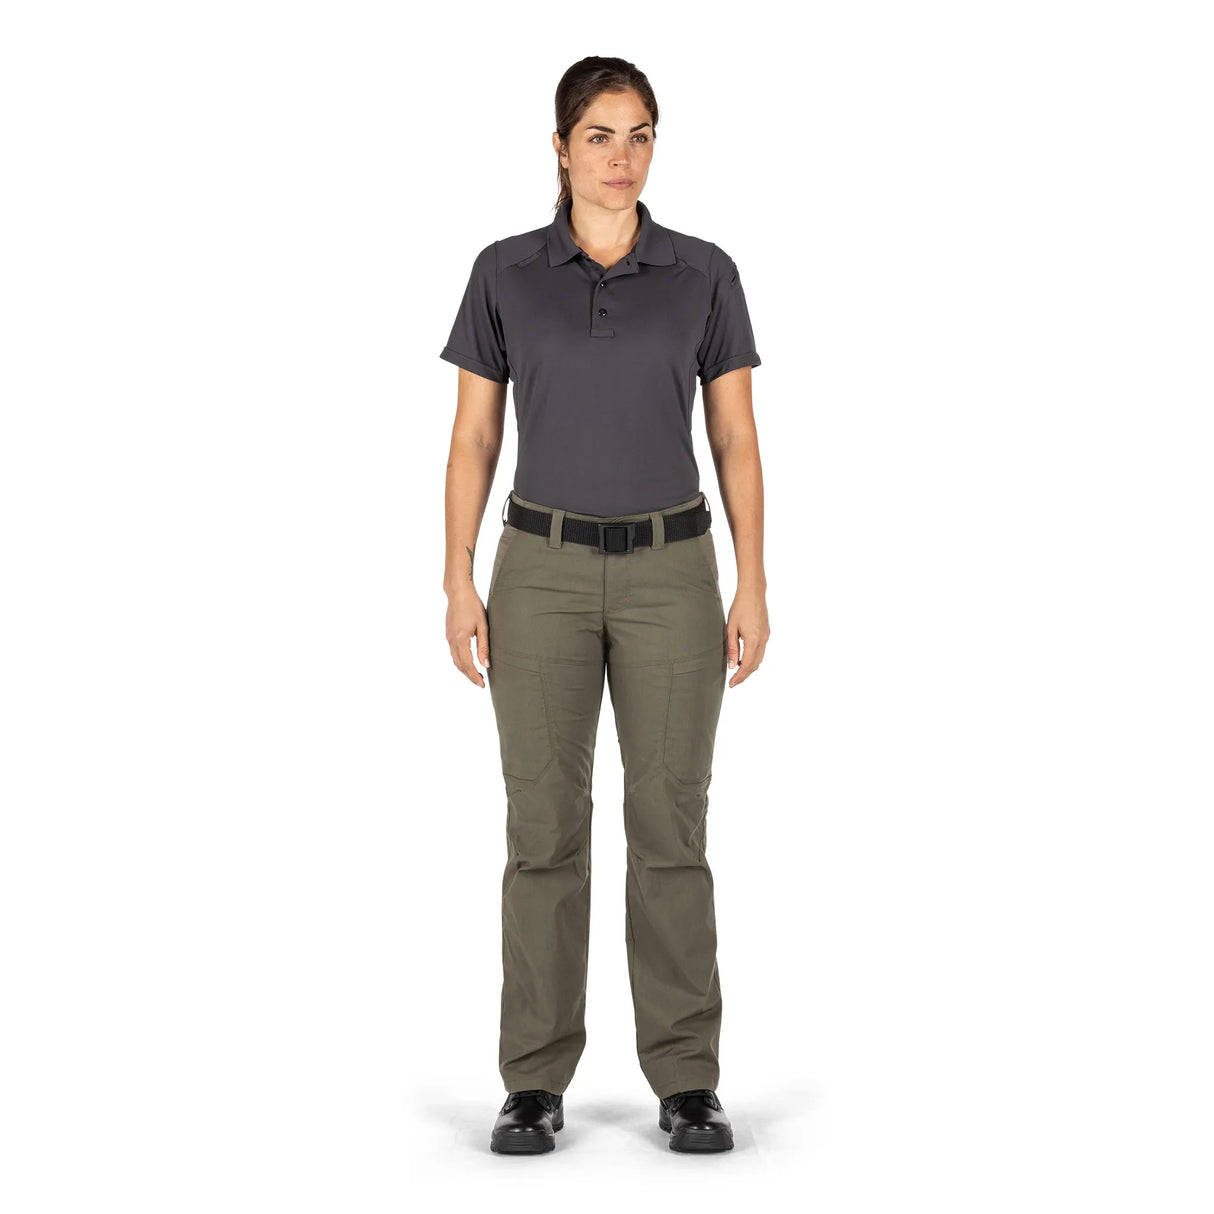 Secure Pocket Design Pant: Handcuff key pockets and flex cuff pockets for essential items.